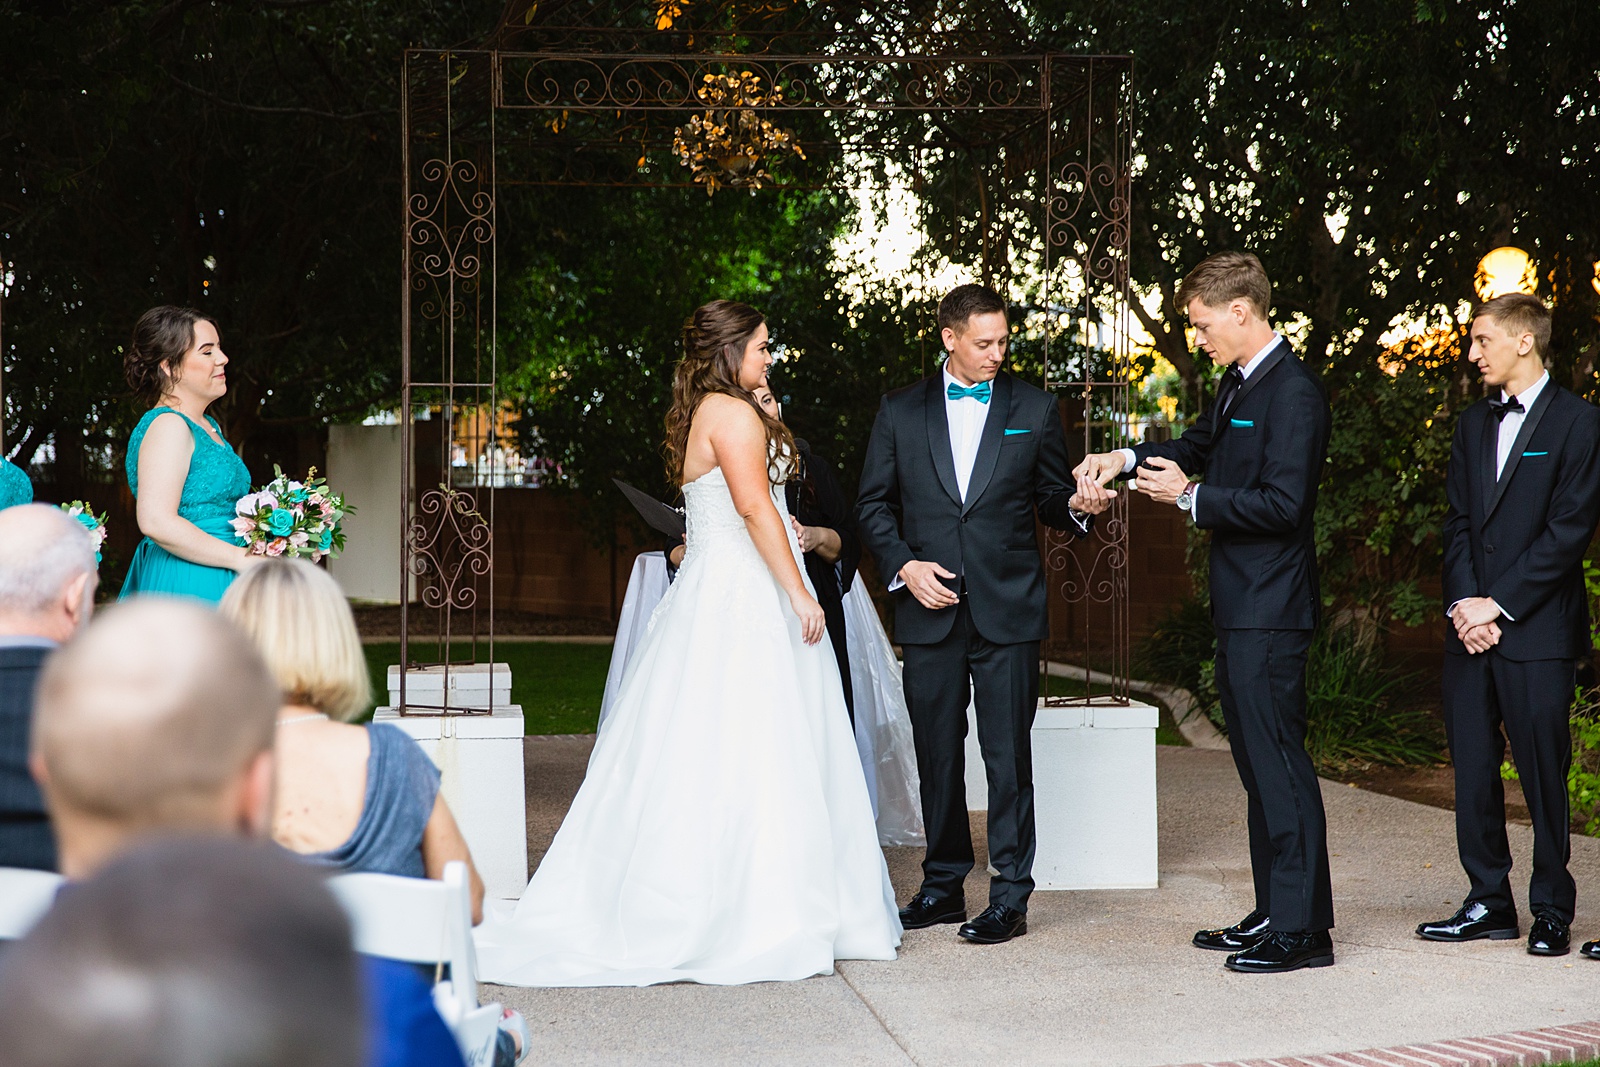 Best man giving the rings to the groom during the wedding ceremony at Stonebridge Manor by Arizona wedding photographer PMA Photography.